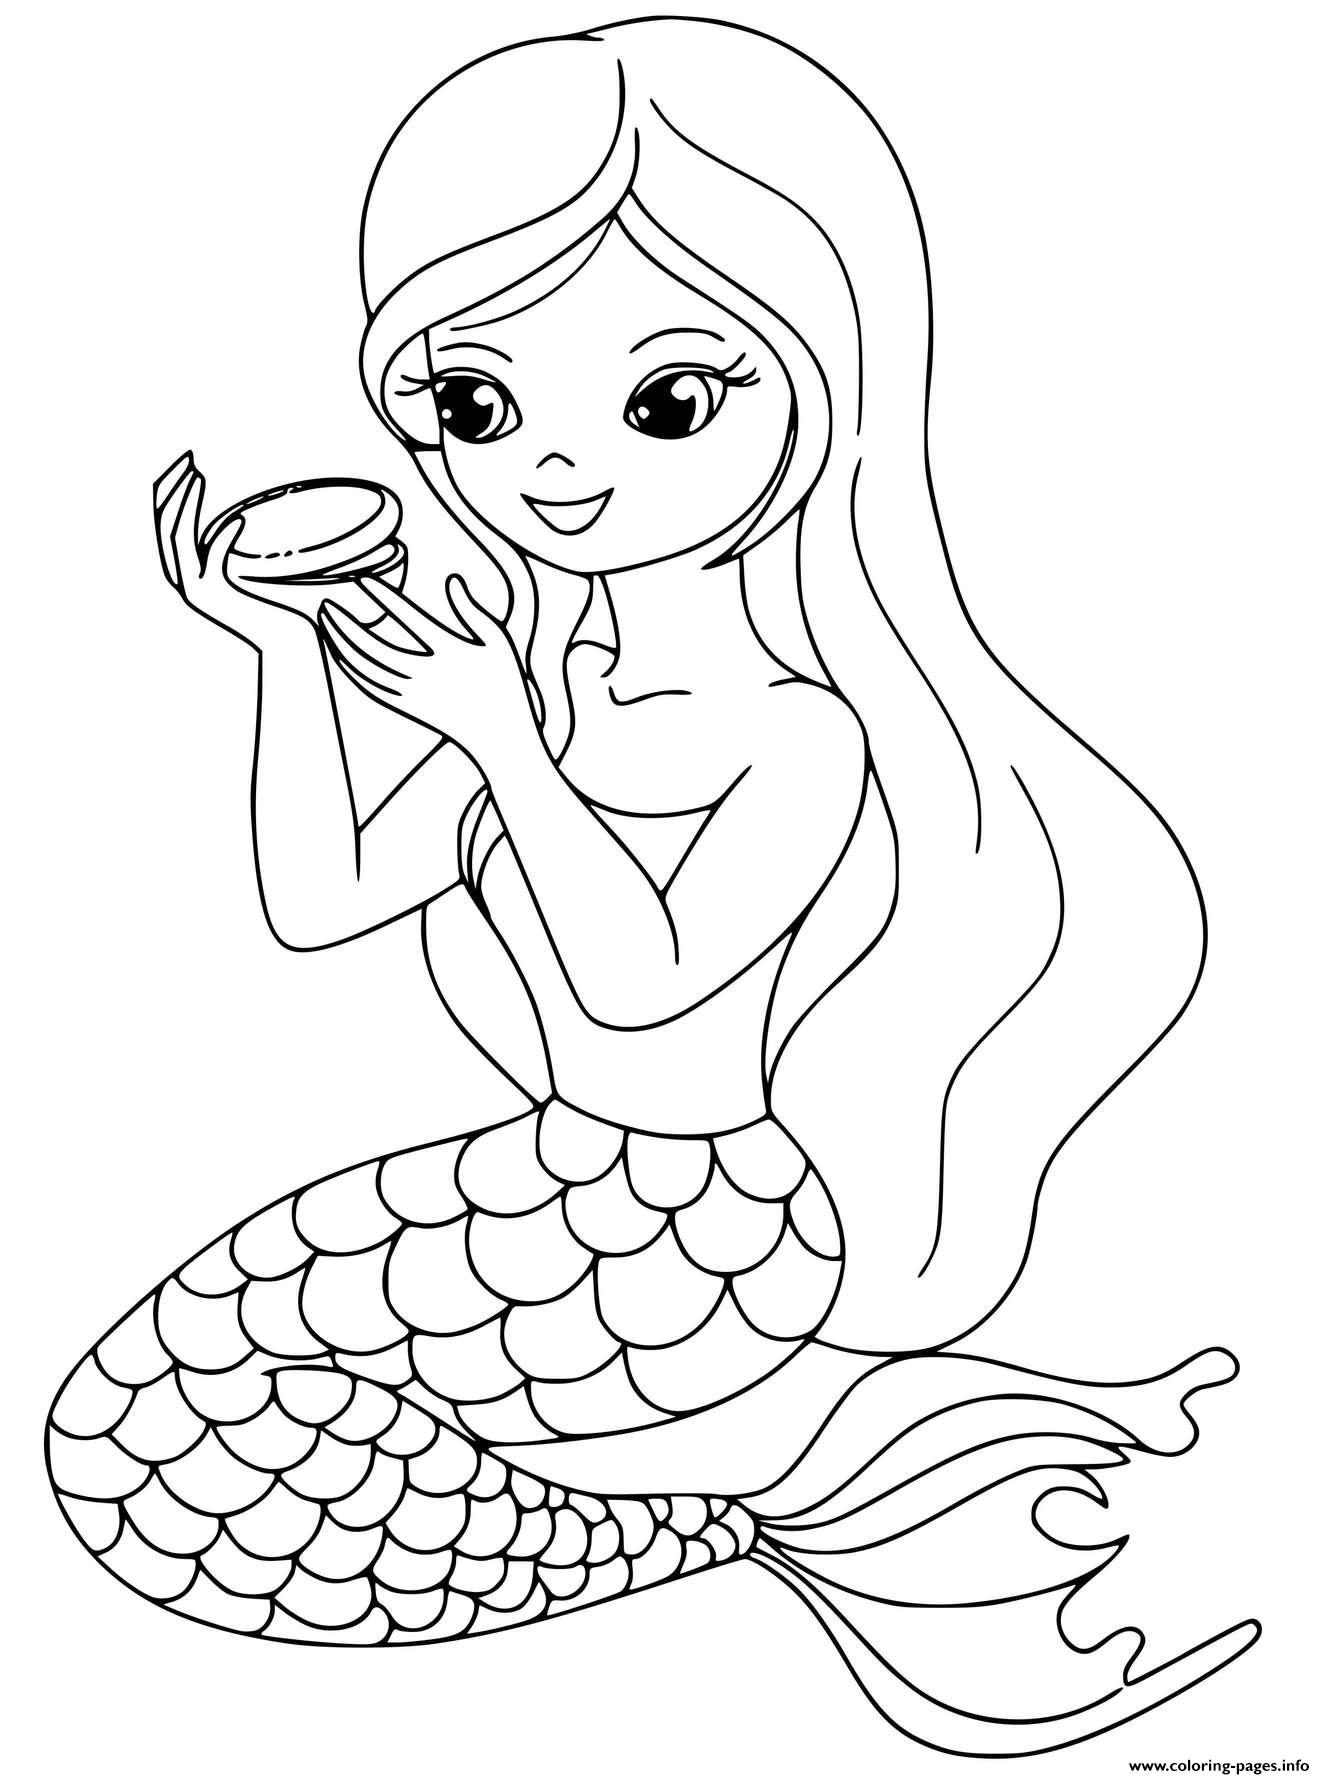 Download Makeup Girl Coloring Pages - Coloring Home